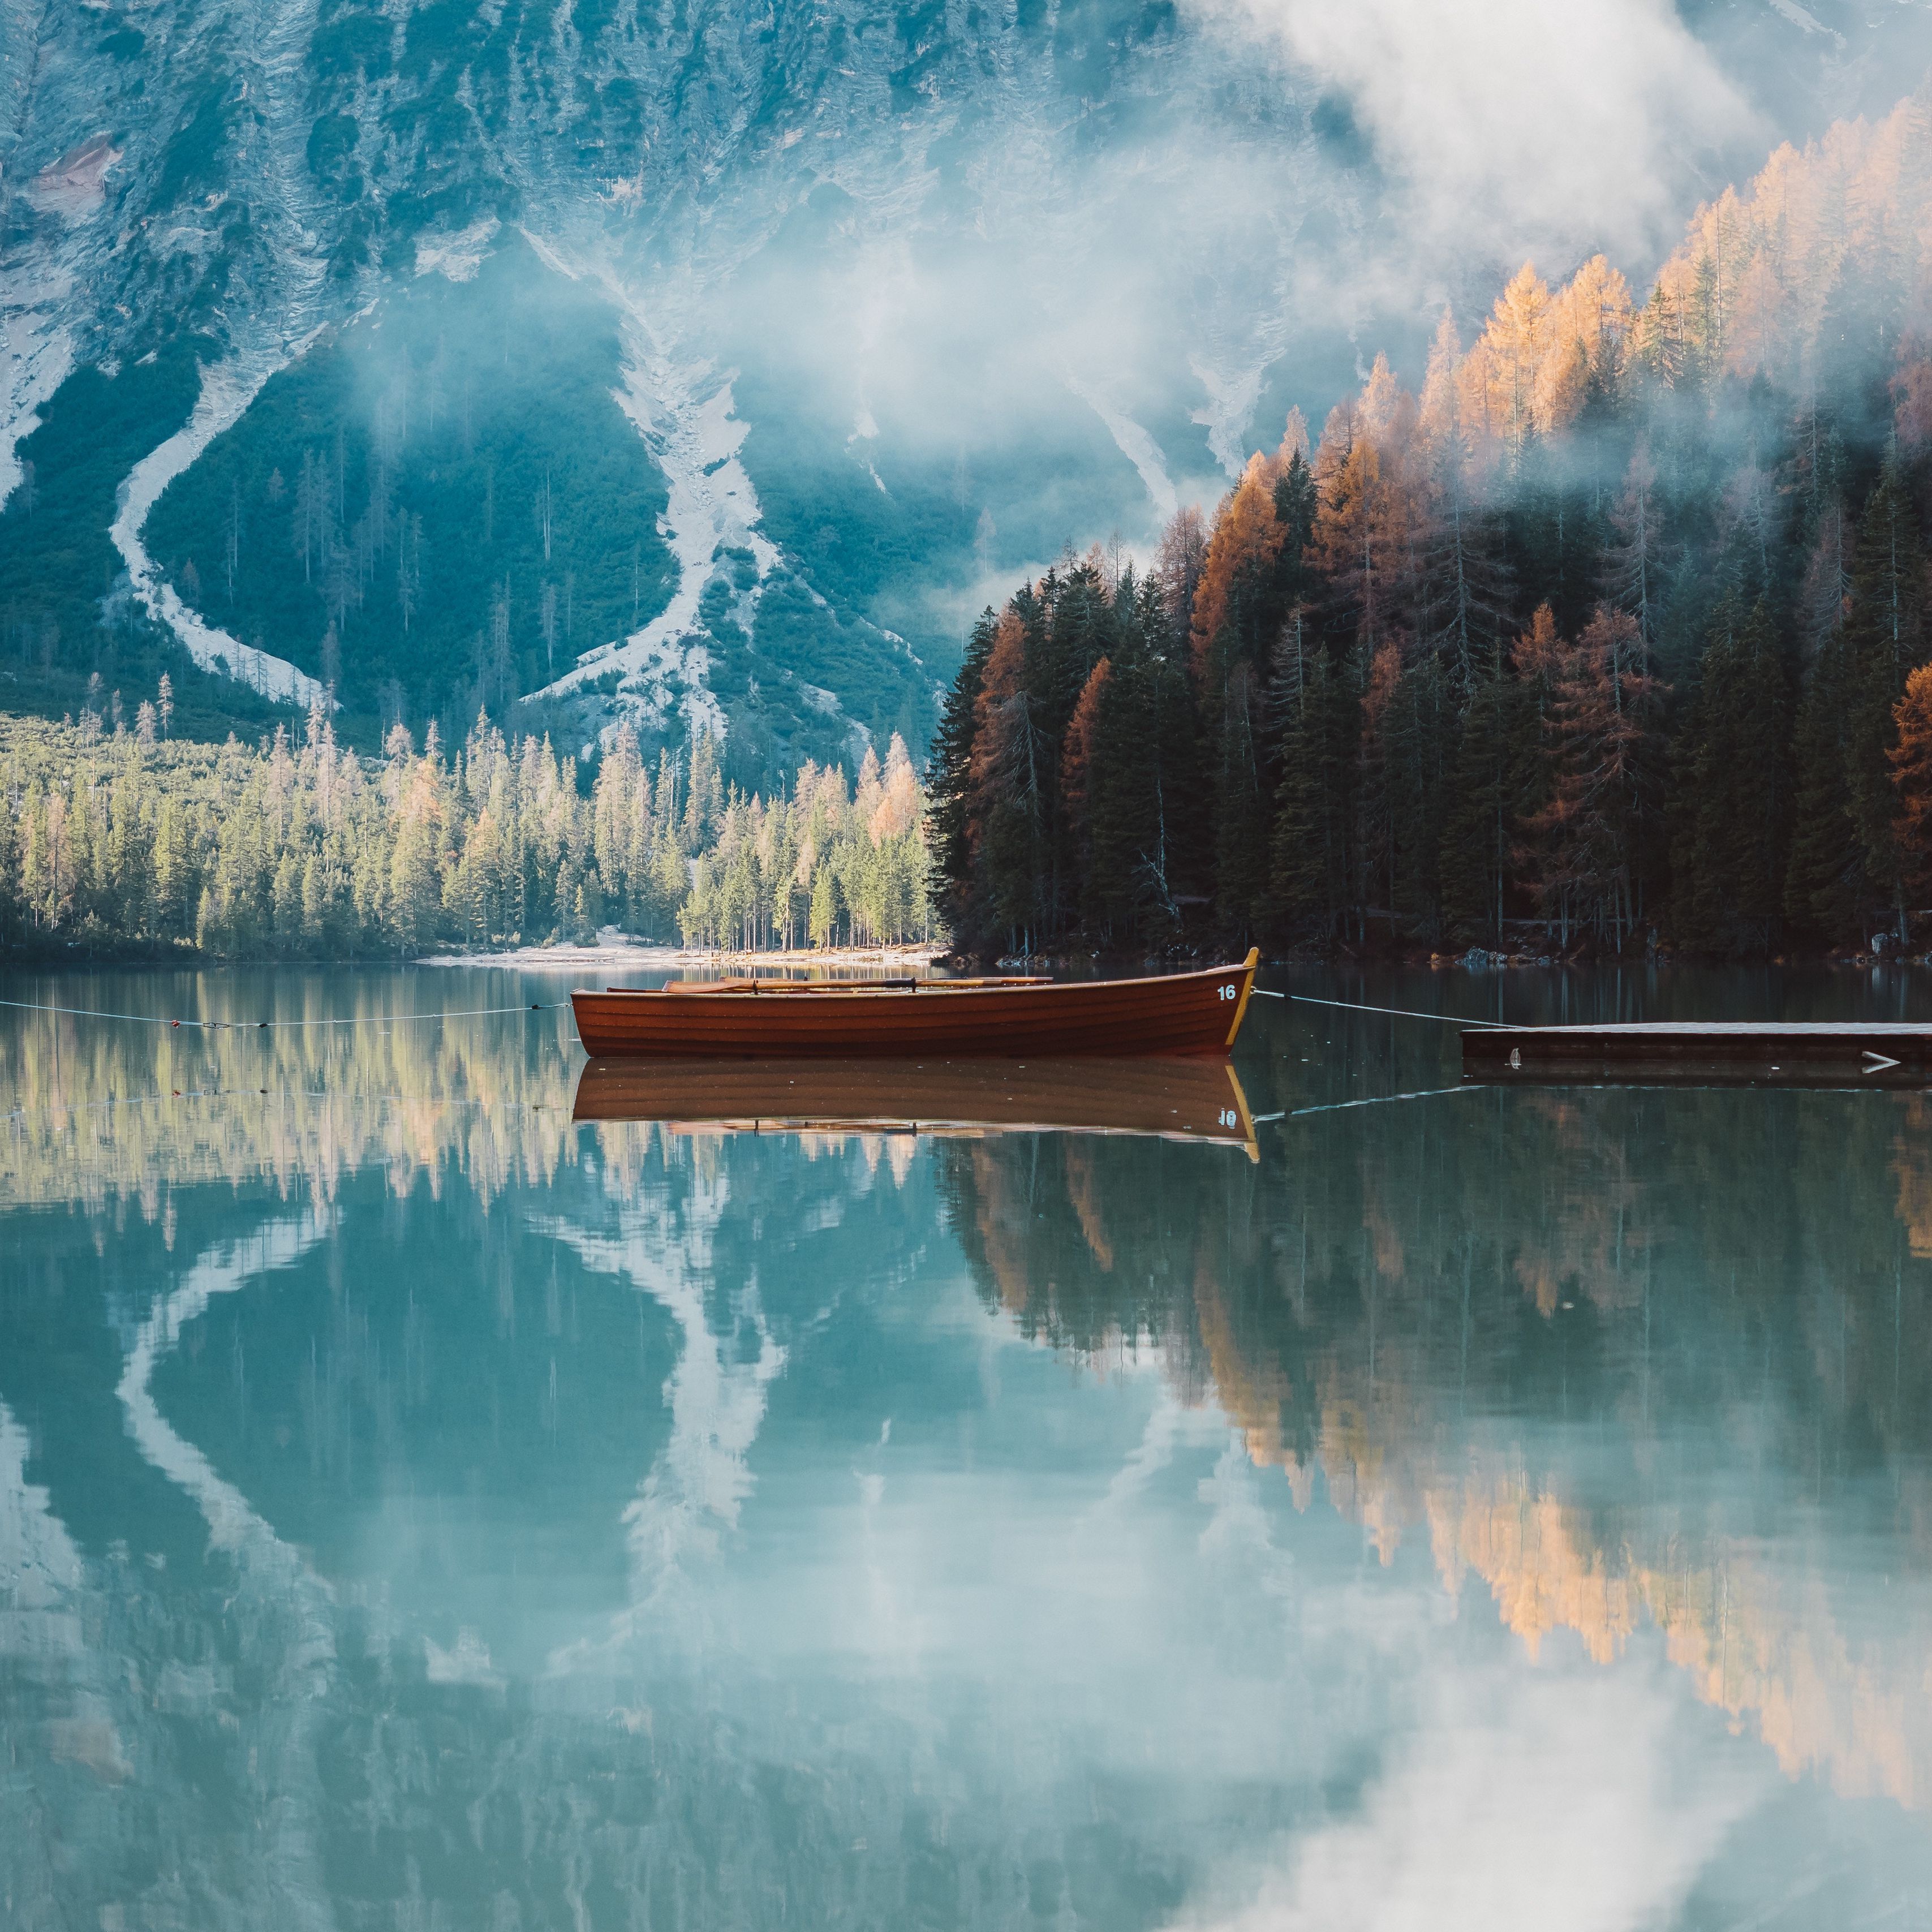 Download wallpaper 3415x3415 boat, mountains, lake, trees, autumn ipad pro 12.9 retina for parallax HD background